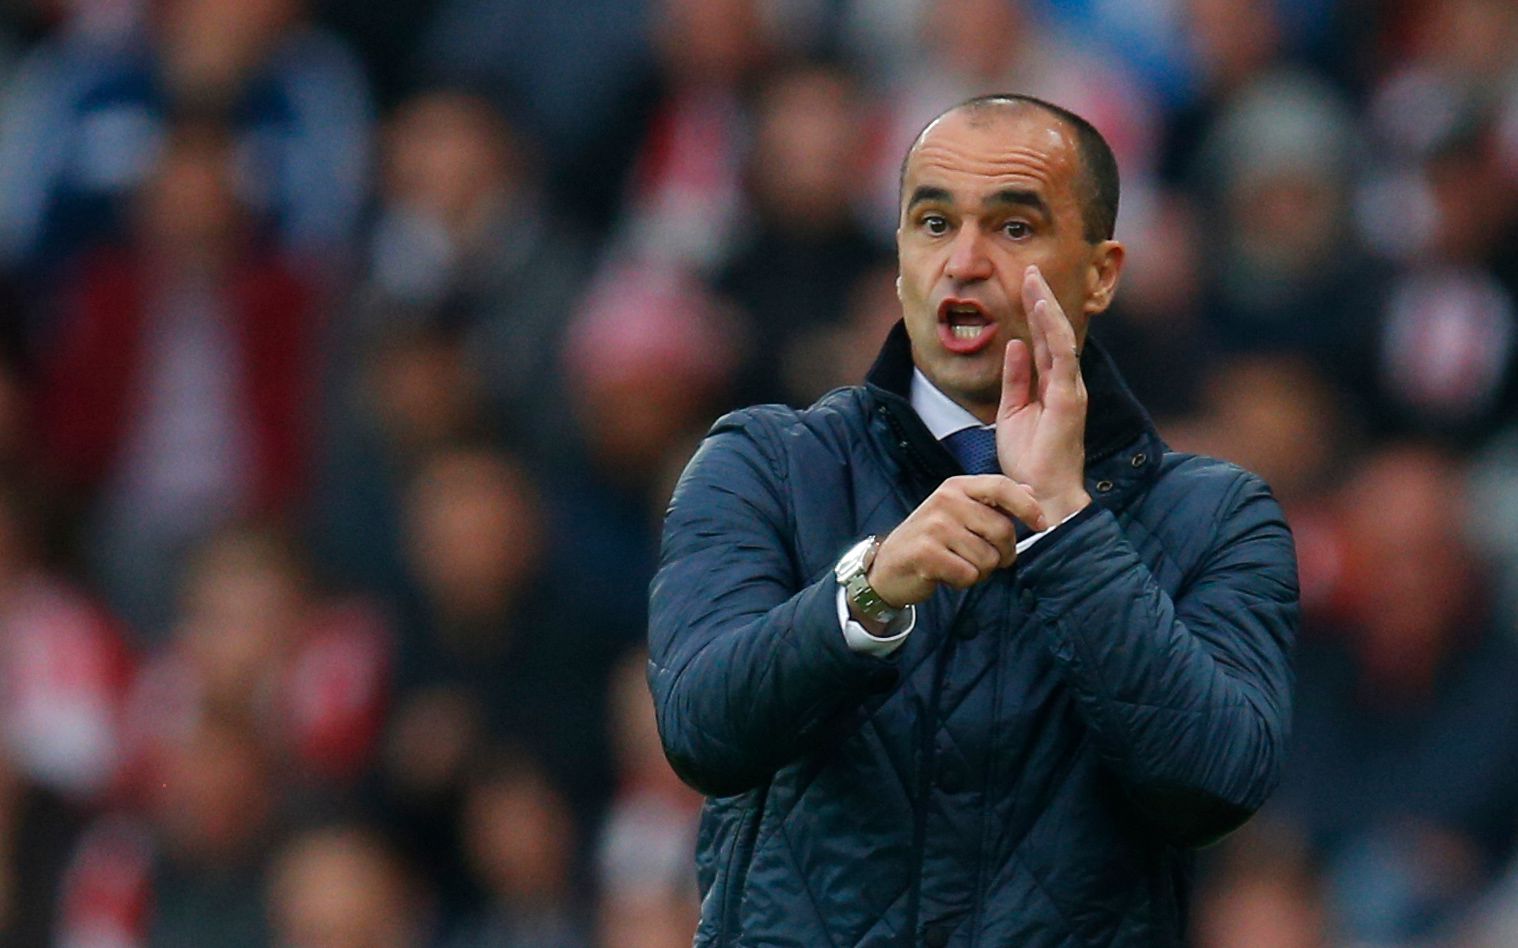 Britain Football Soccer - Sunderland v Everton - Barclays Premier League - The Stadium of Light - 11/5/16
Everton manager Roberto Martinez
Action Images via Reuters / Jason Cairnduff
Livepic
EDITORIAL USE ONLY. No use with unauthorized audio, video, data, fixture lists, club/league logos or 